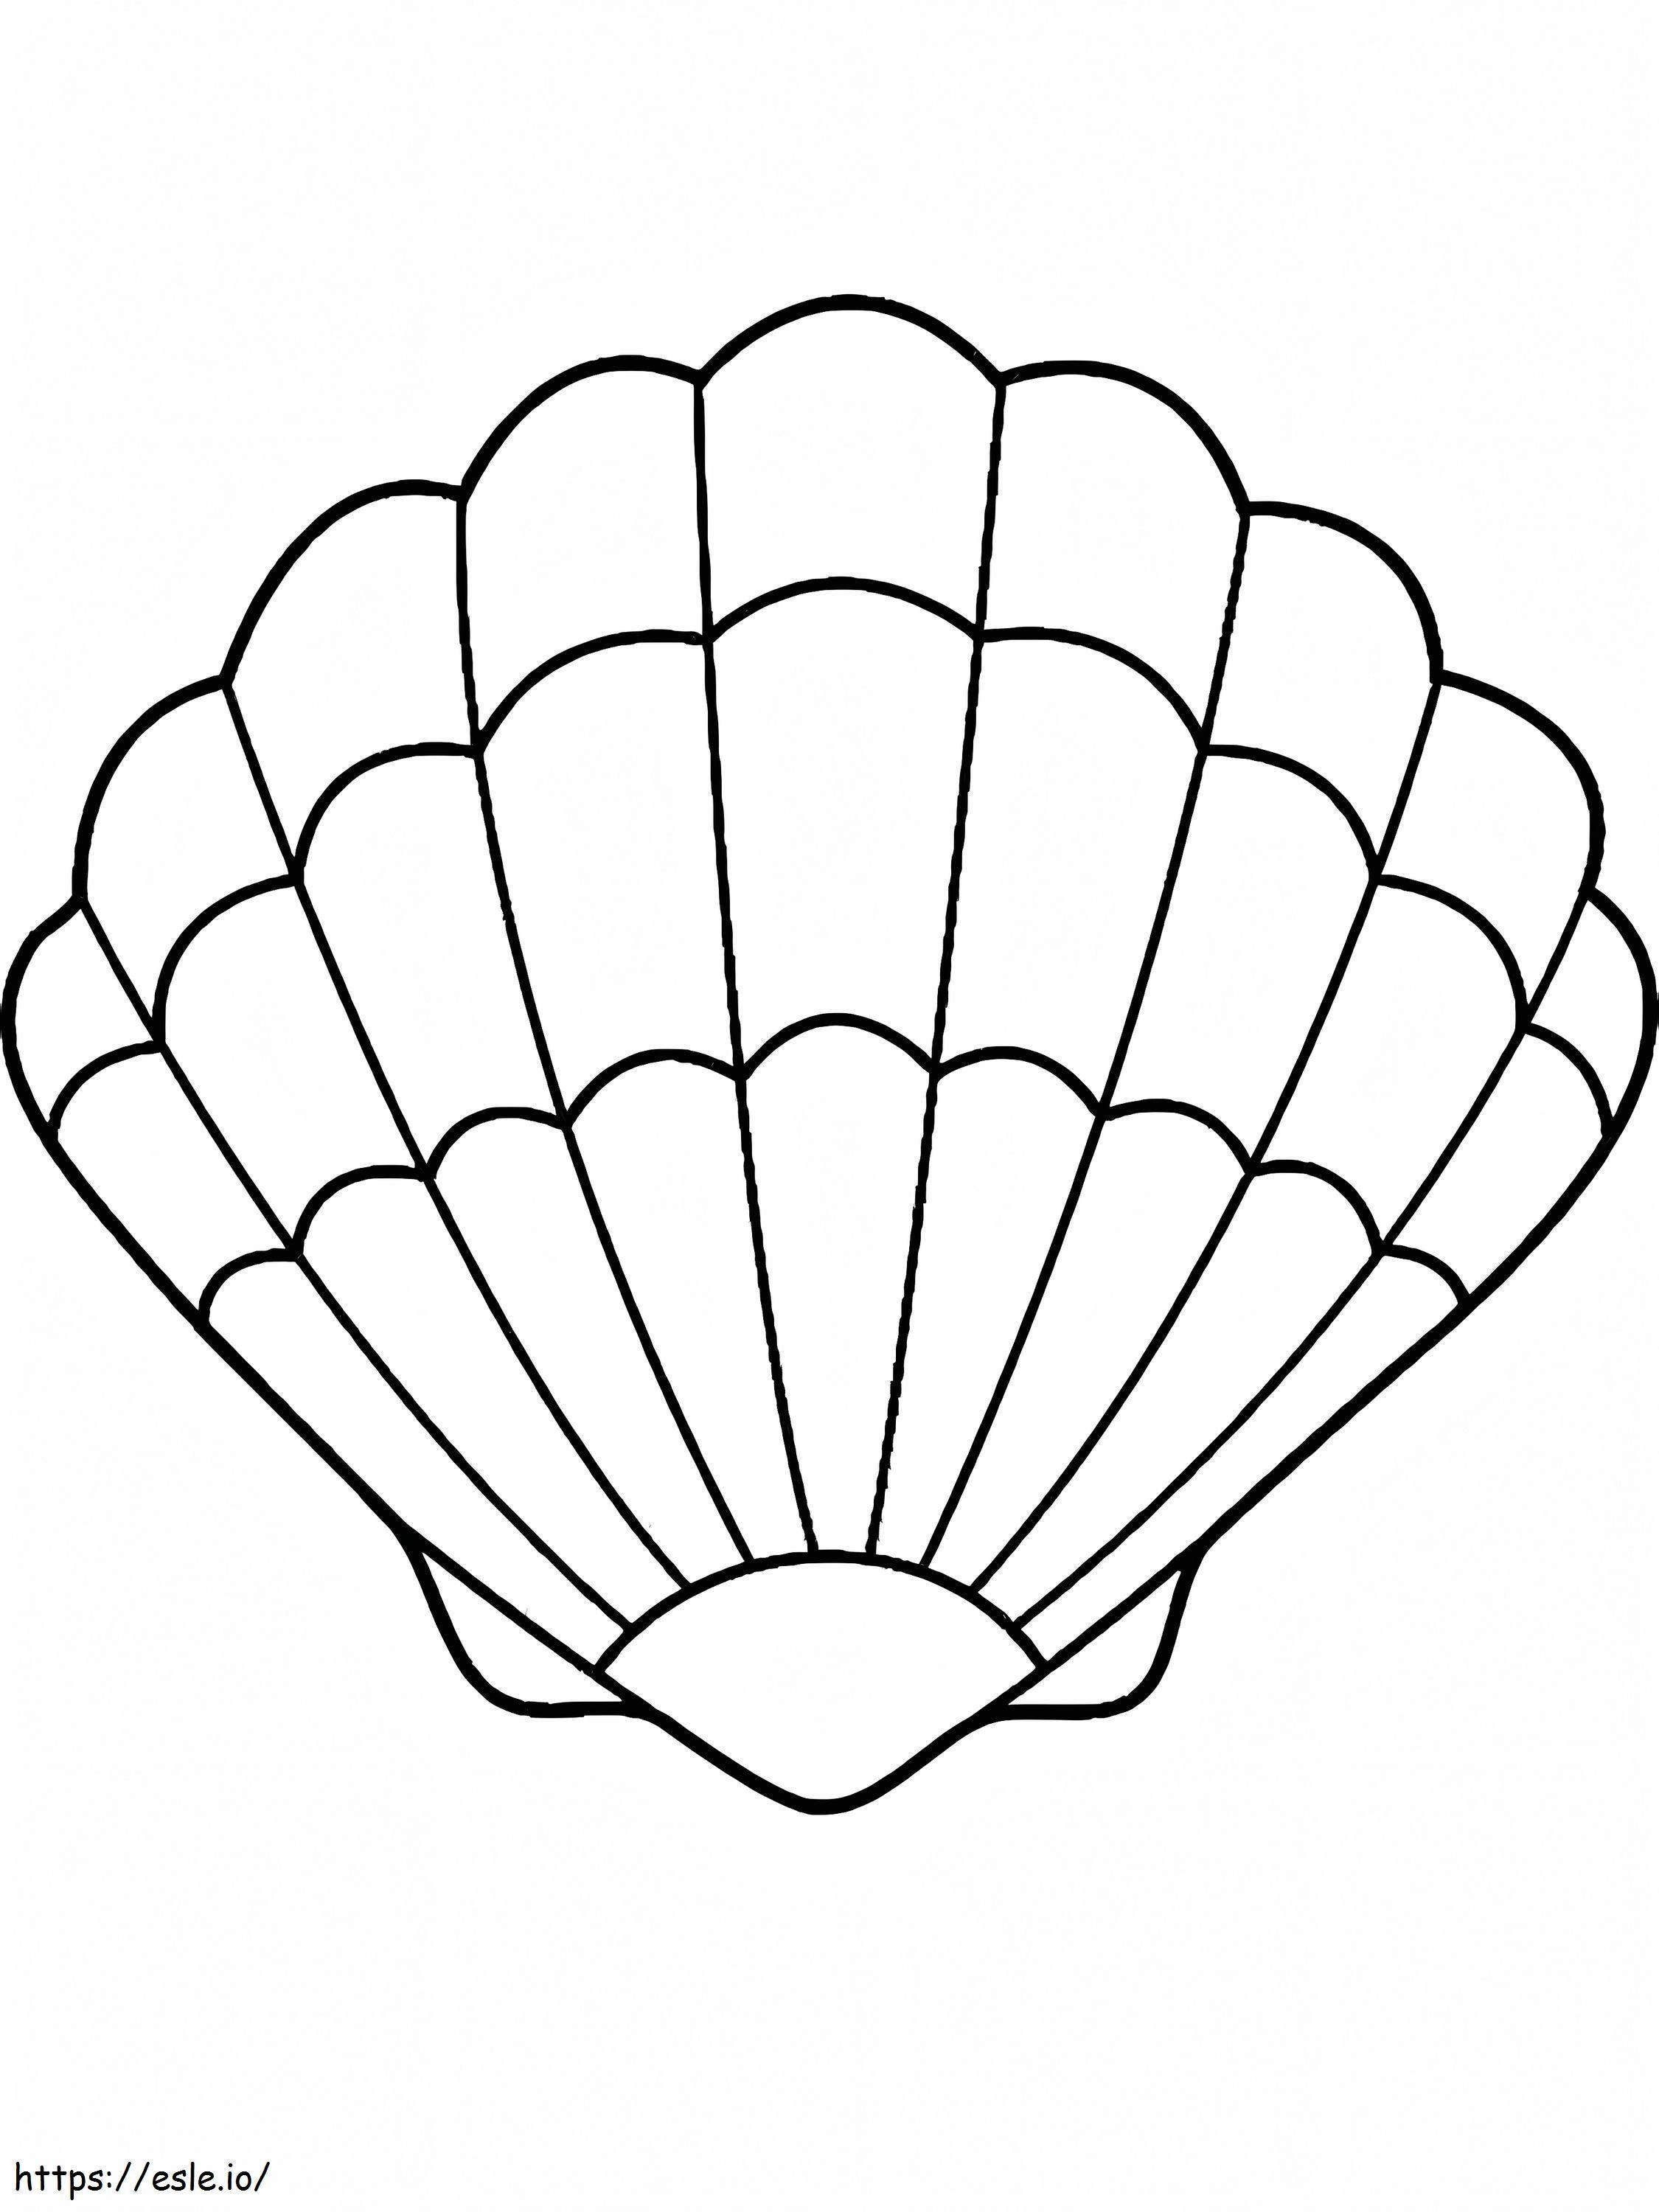 Normal Seashell 1 coloring page